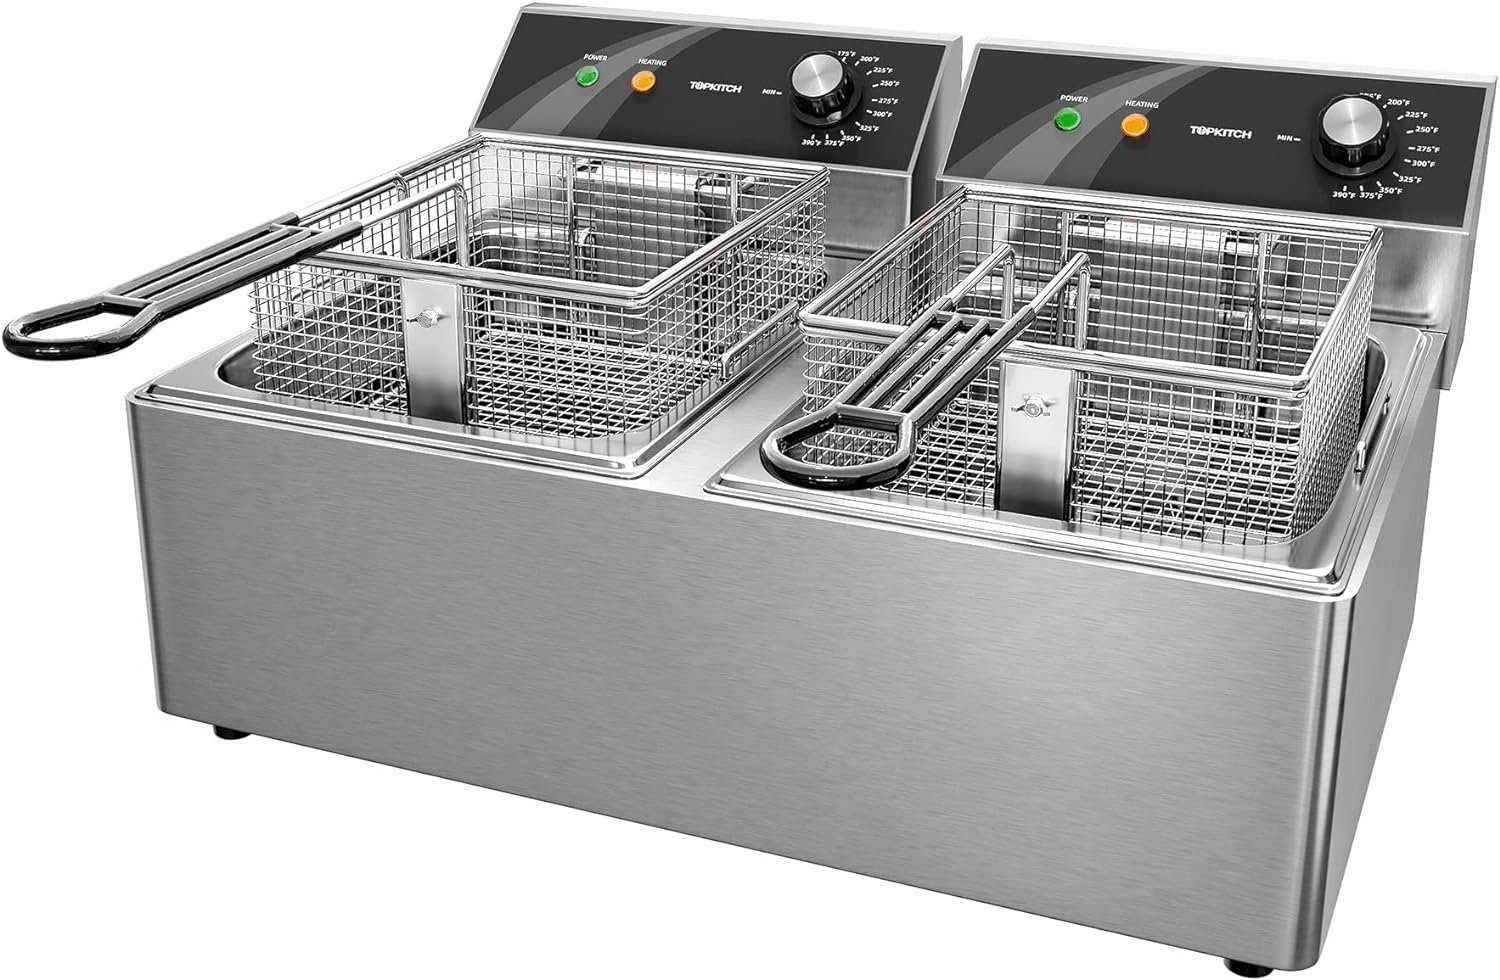 TOPKITCH Commercial Deep Fryer Stainless Steel Dual Tank with 2 Baskets Capacity 10L X 2 Electric Countertop Fryer for Restaurant and Home Use, 120V 3600W